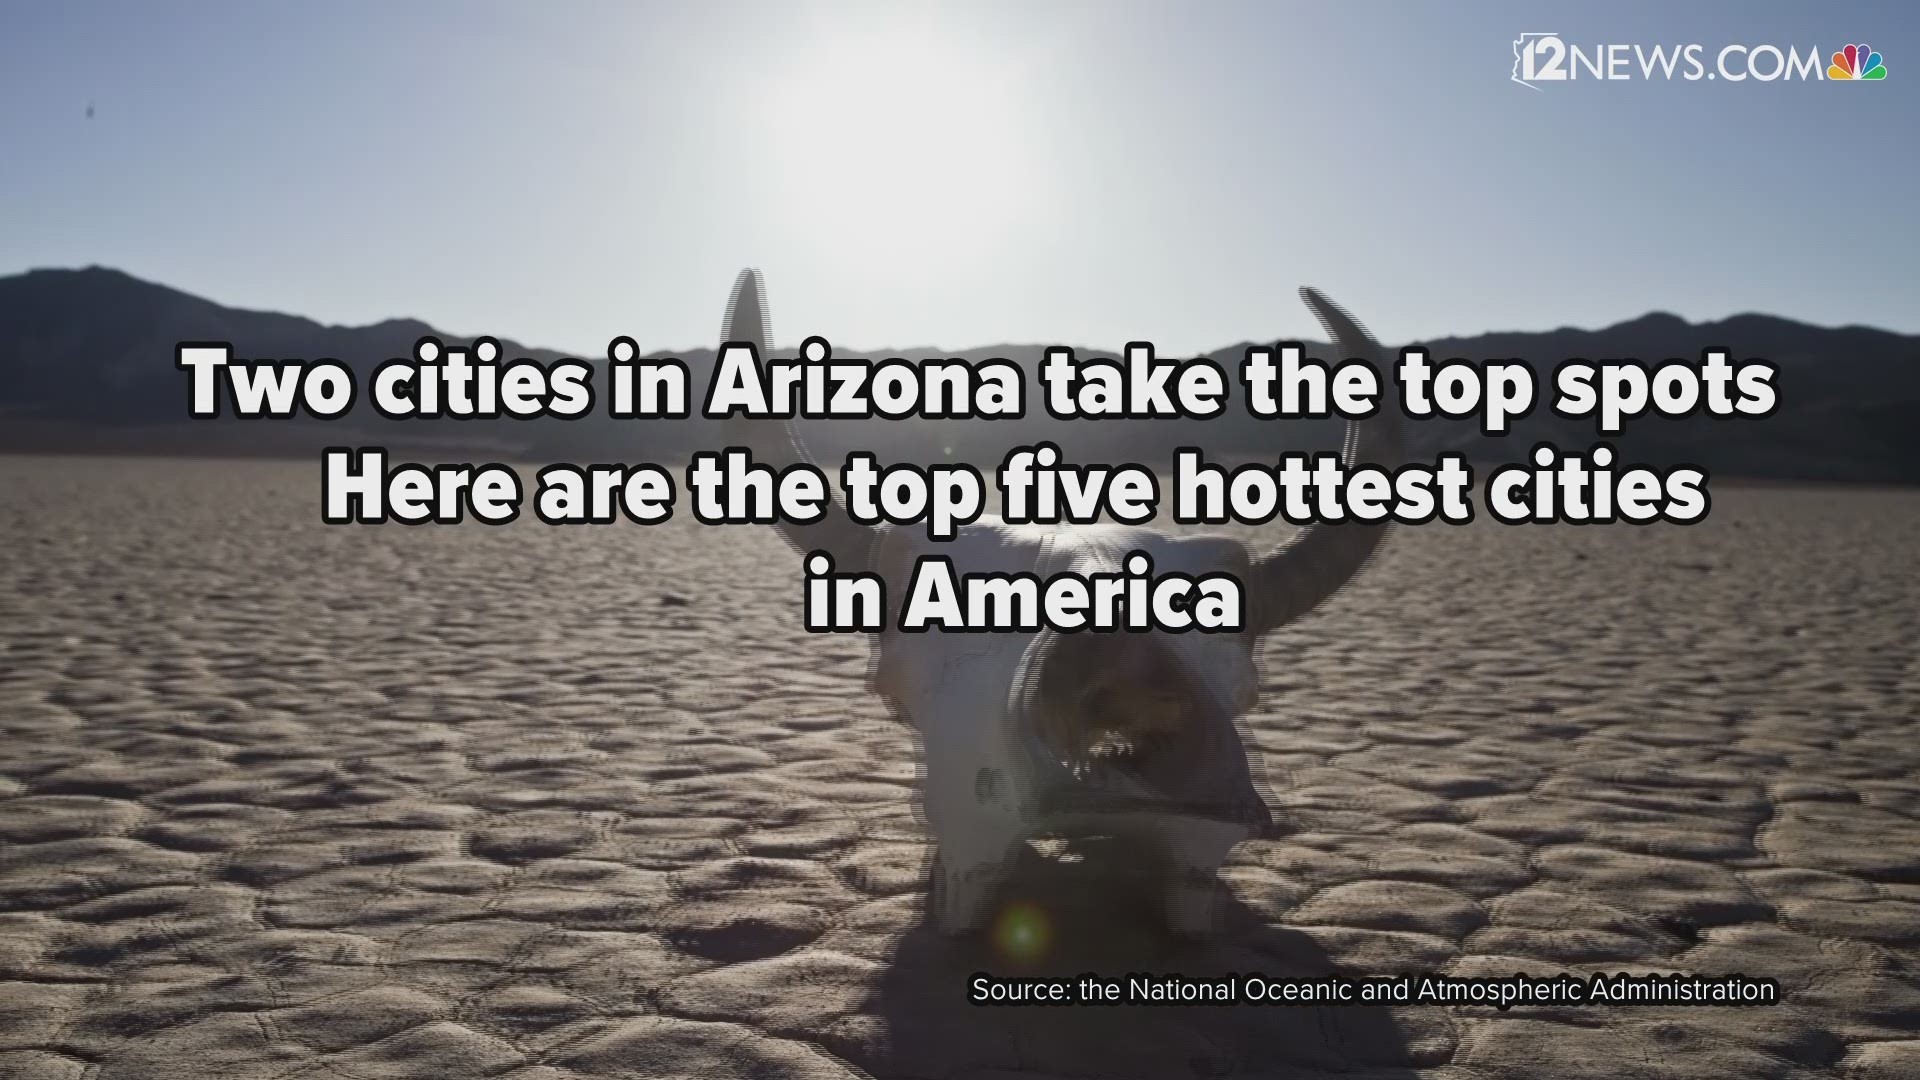 Death Valley may have the highest recorded temp for one day, but what about the hottest temperatures seasonally?